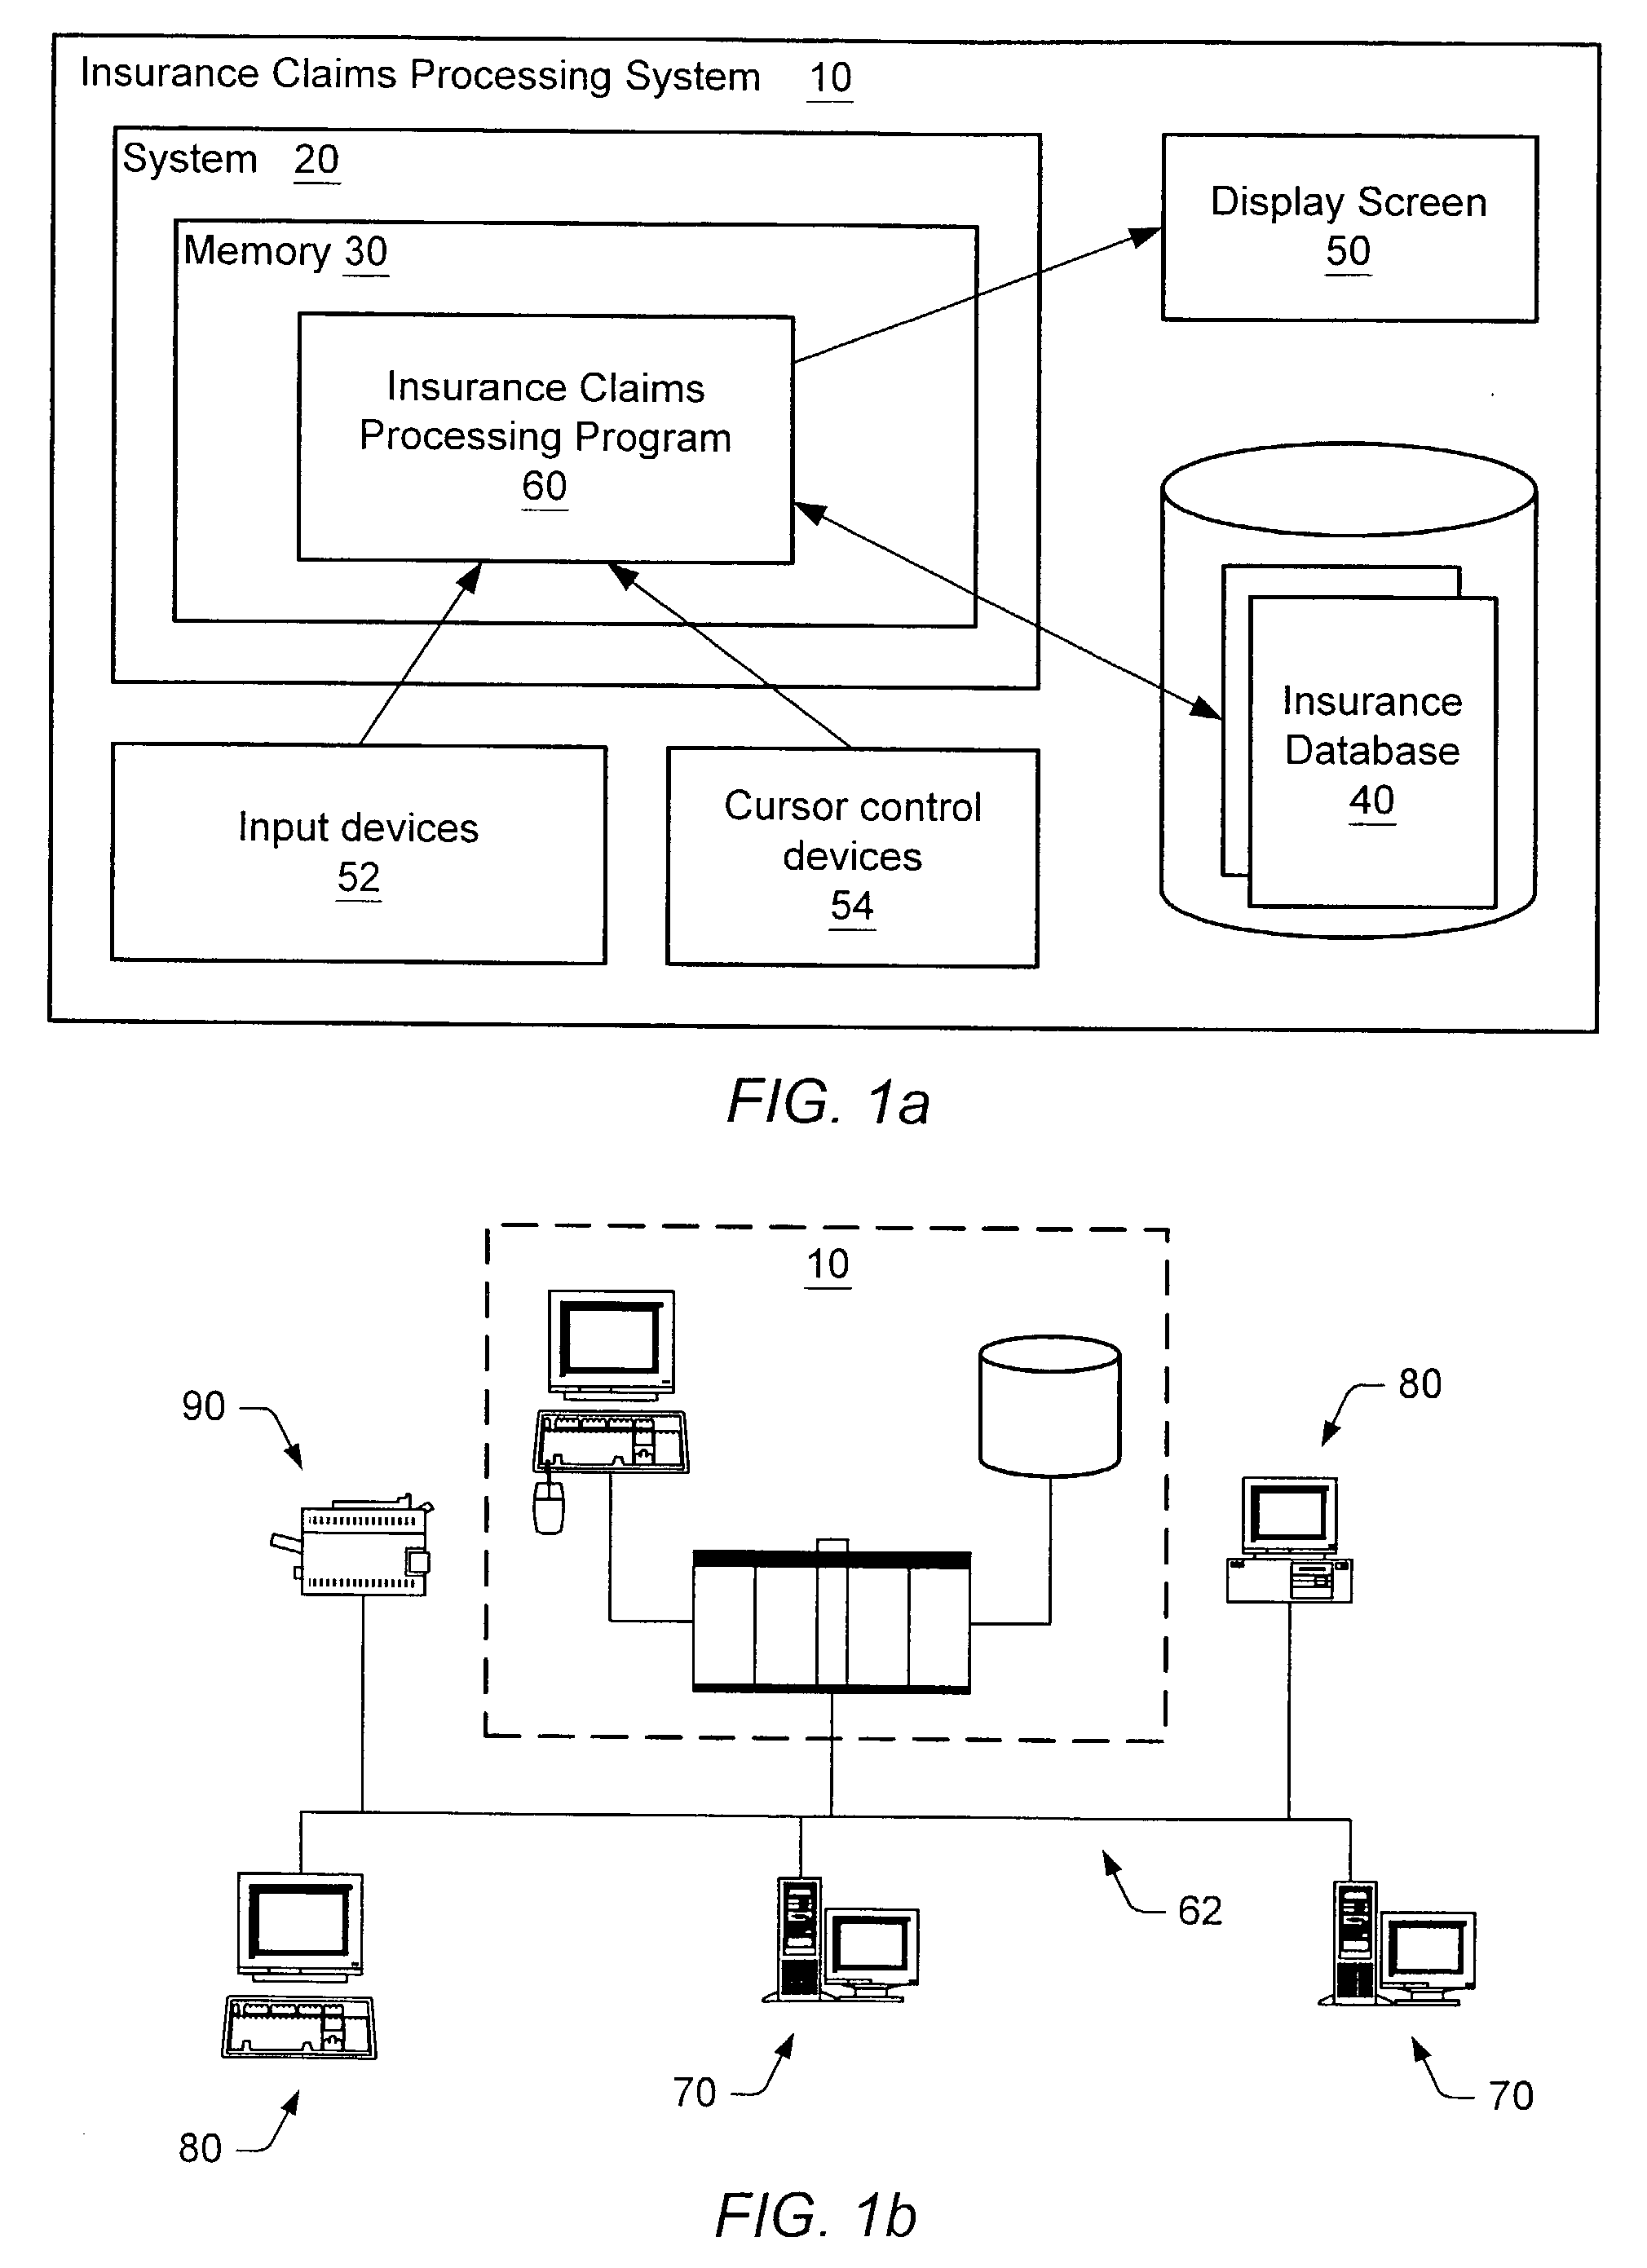 Method of generating a graphical display of a business rule and associated business rule elements